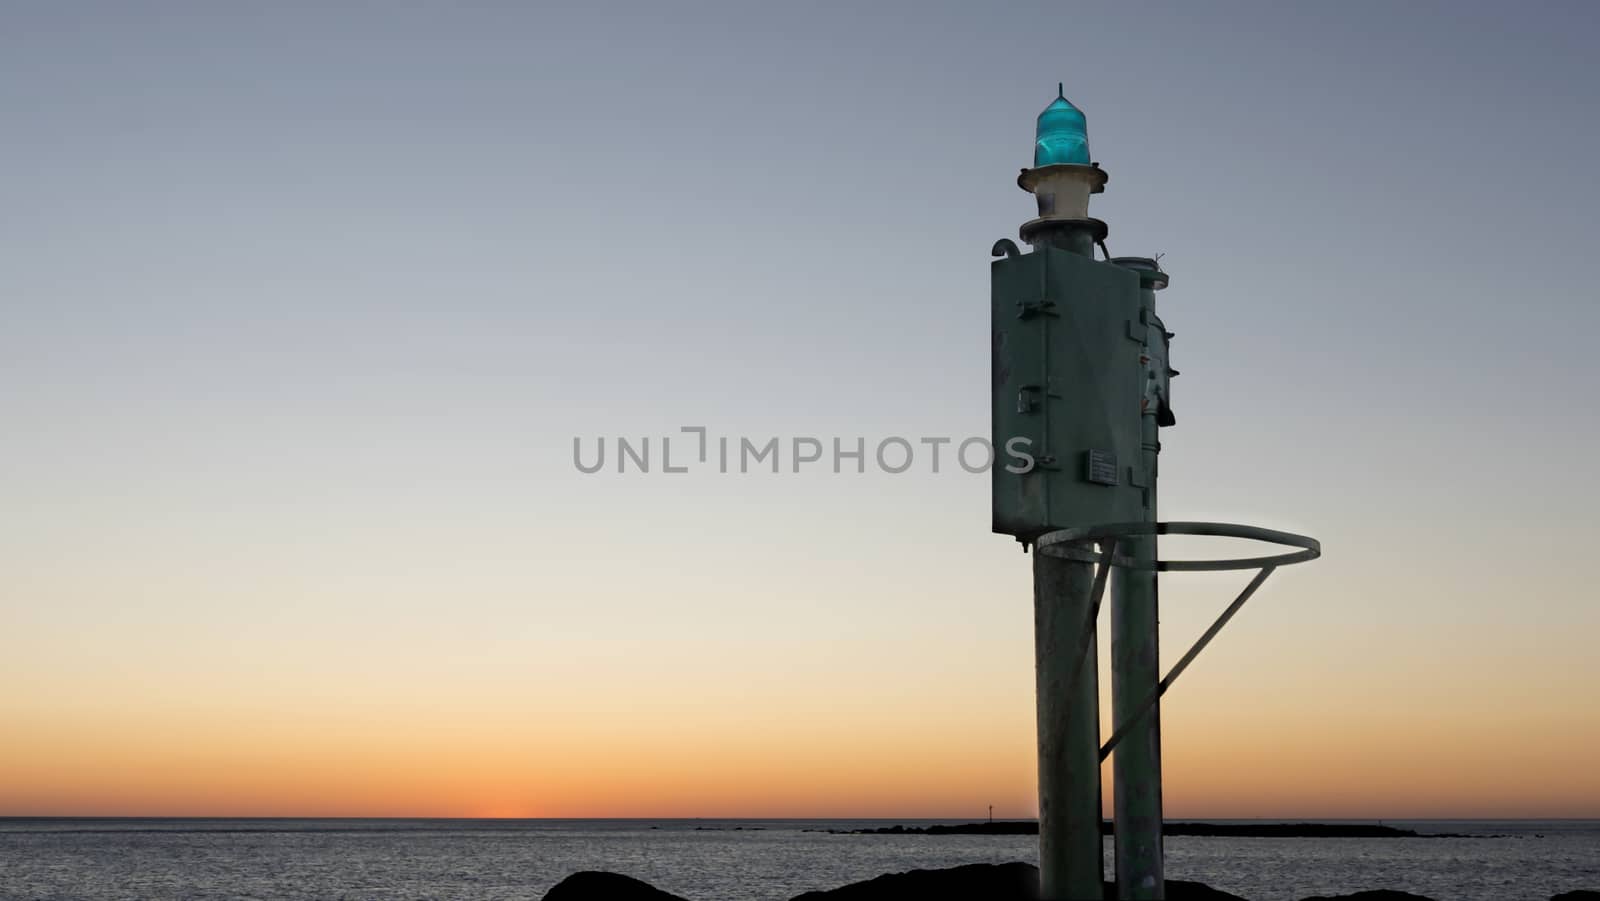 The sea at dawn or sunset with a small lighthouse in the harbor in the foreground